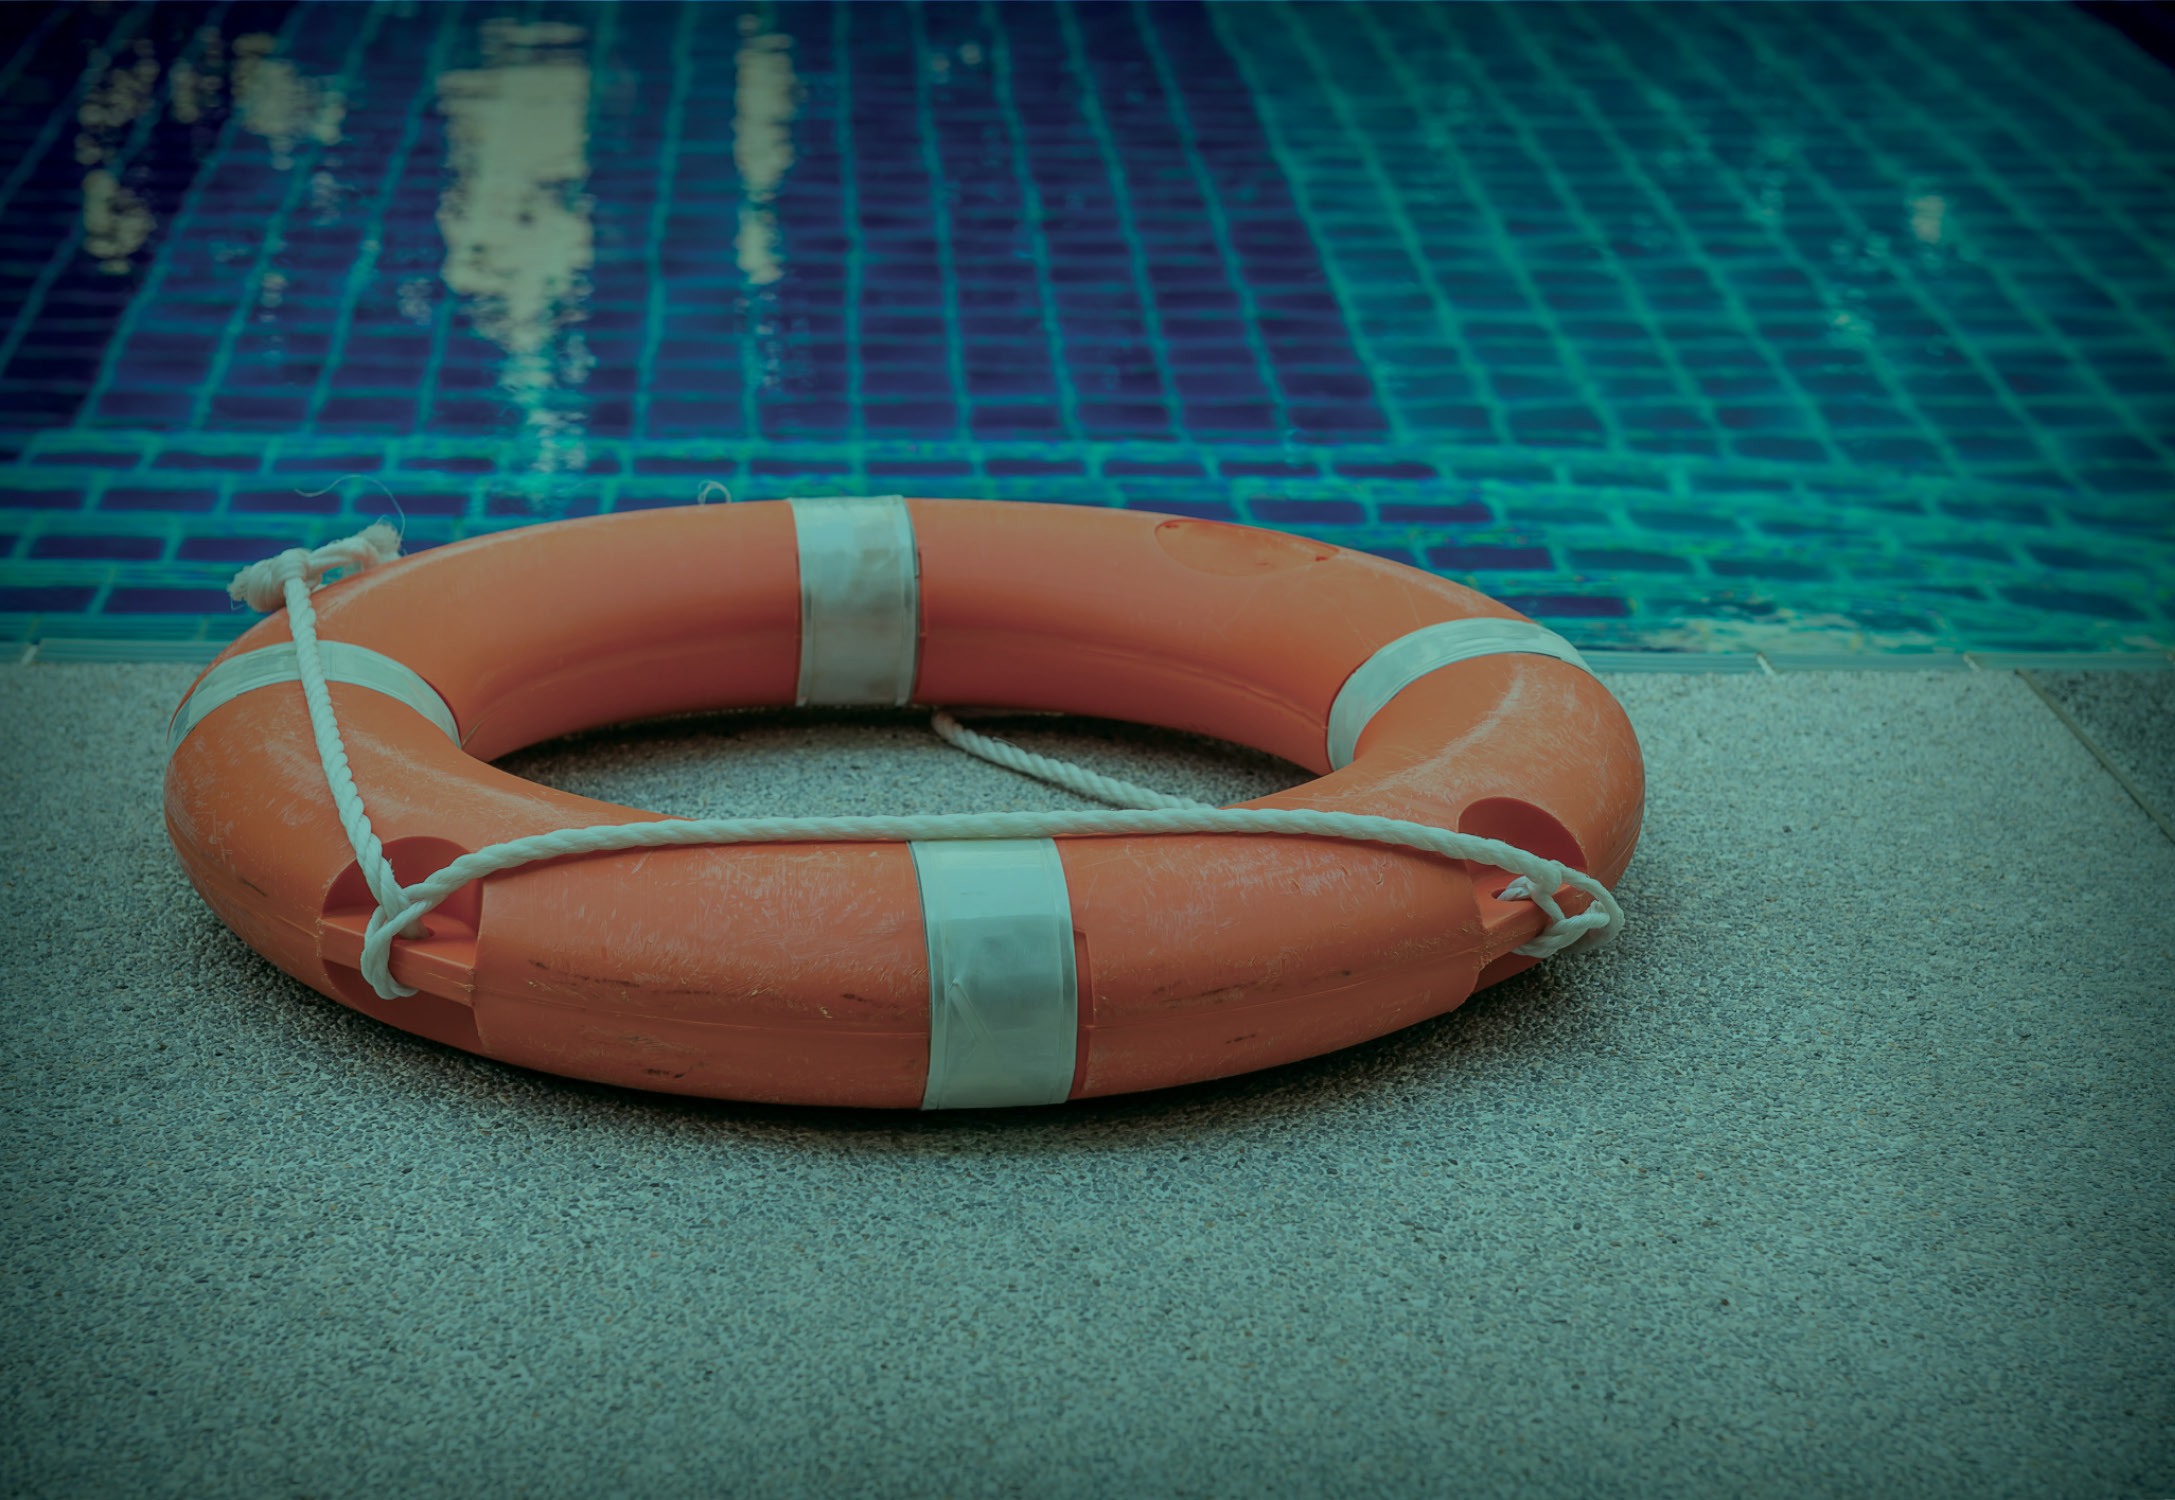 mitigate risk at the pool with a lifesaving device